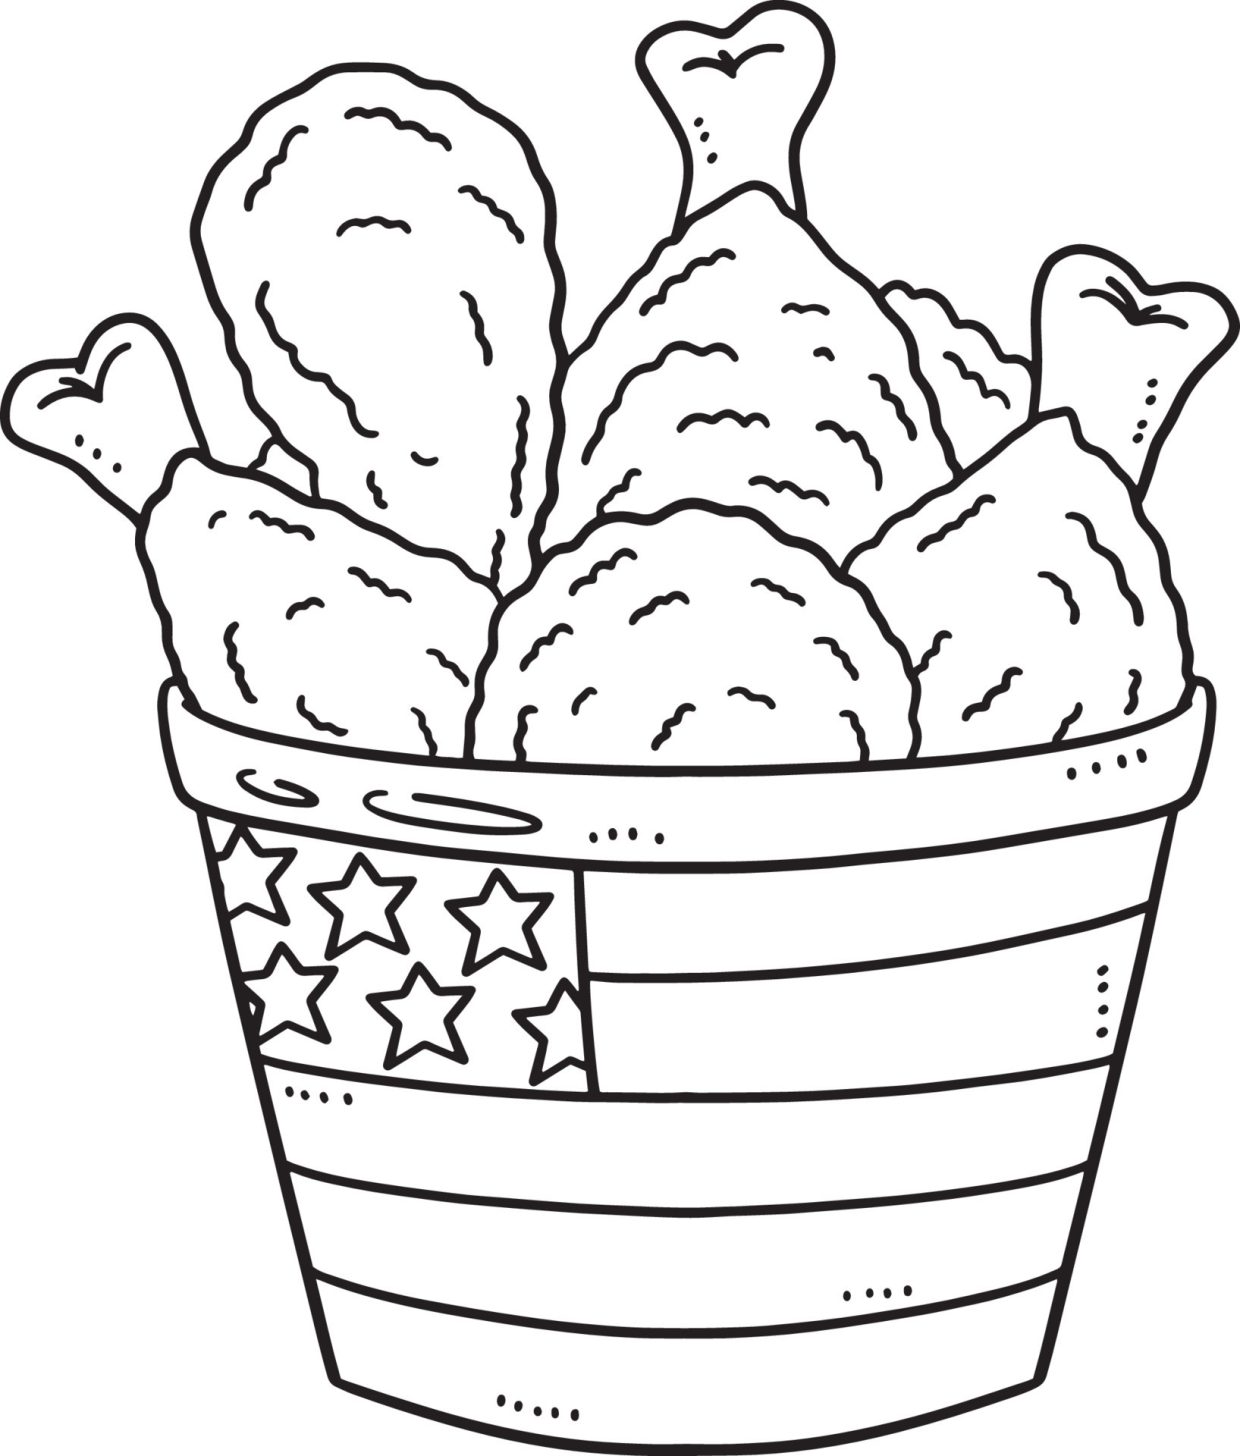 Fried Chicken Coloring Pages 2